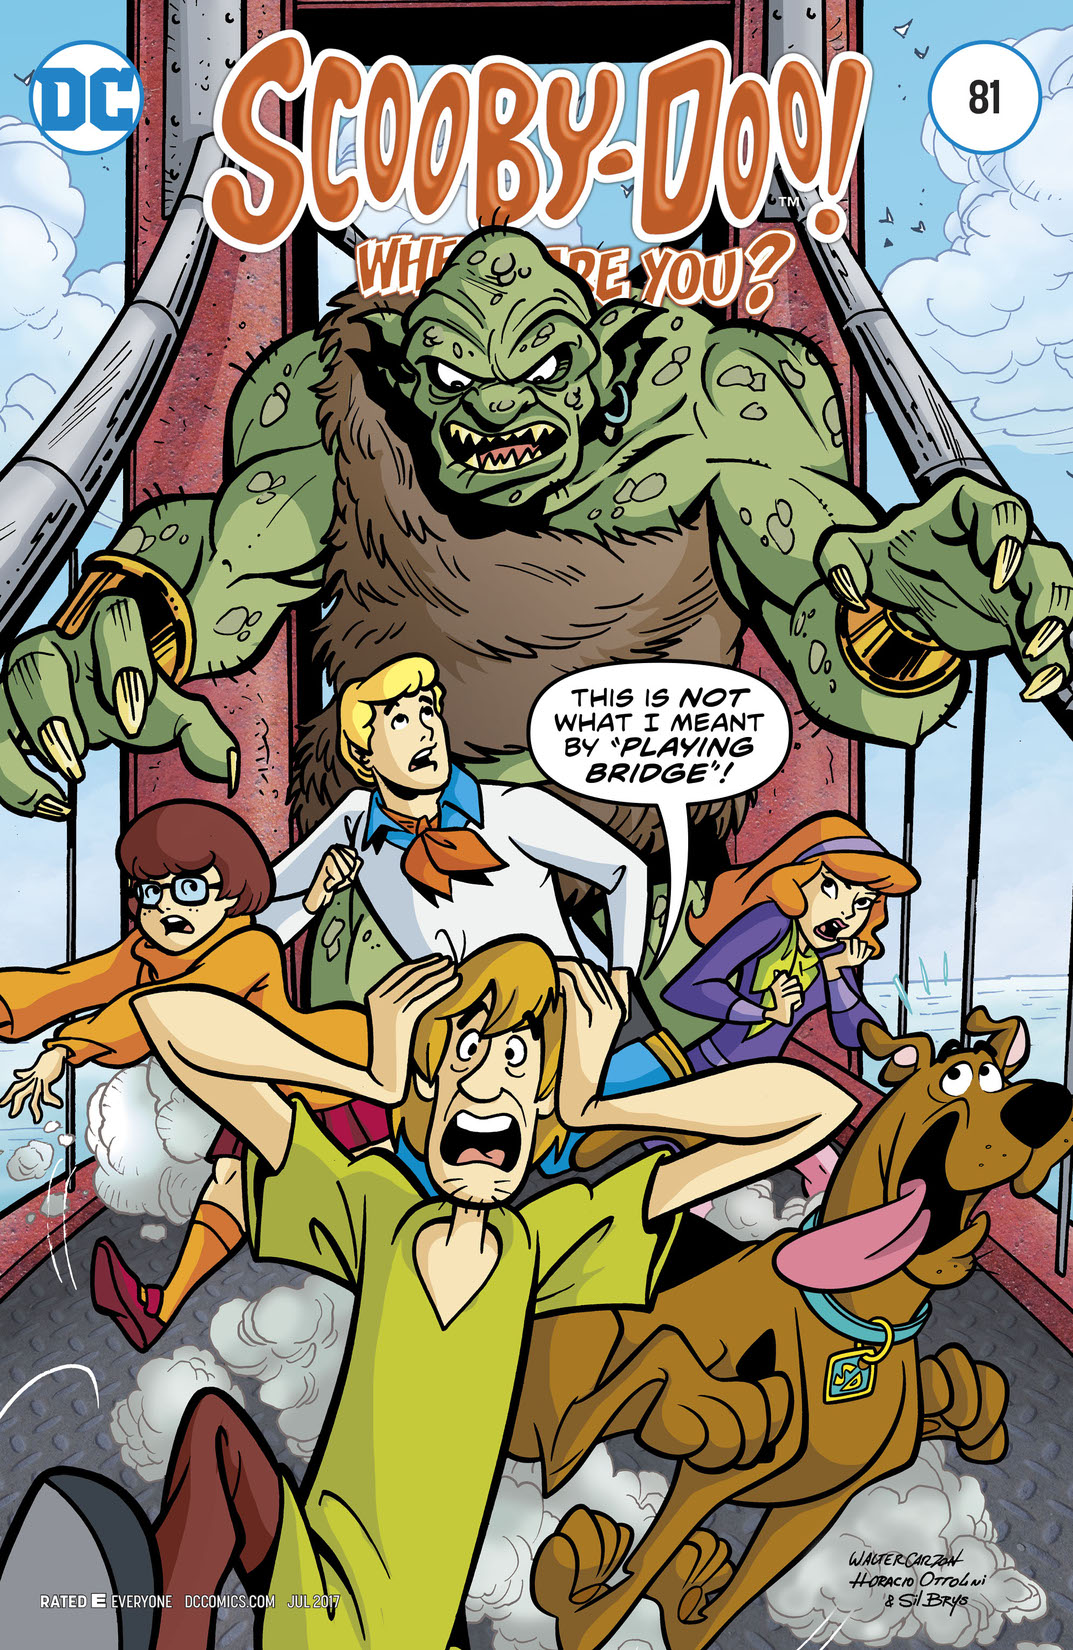 Scooby-Doo, Where Are You? #81 preview images